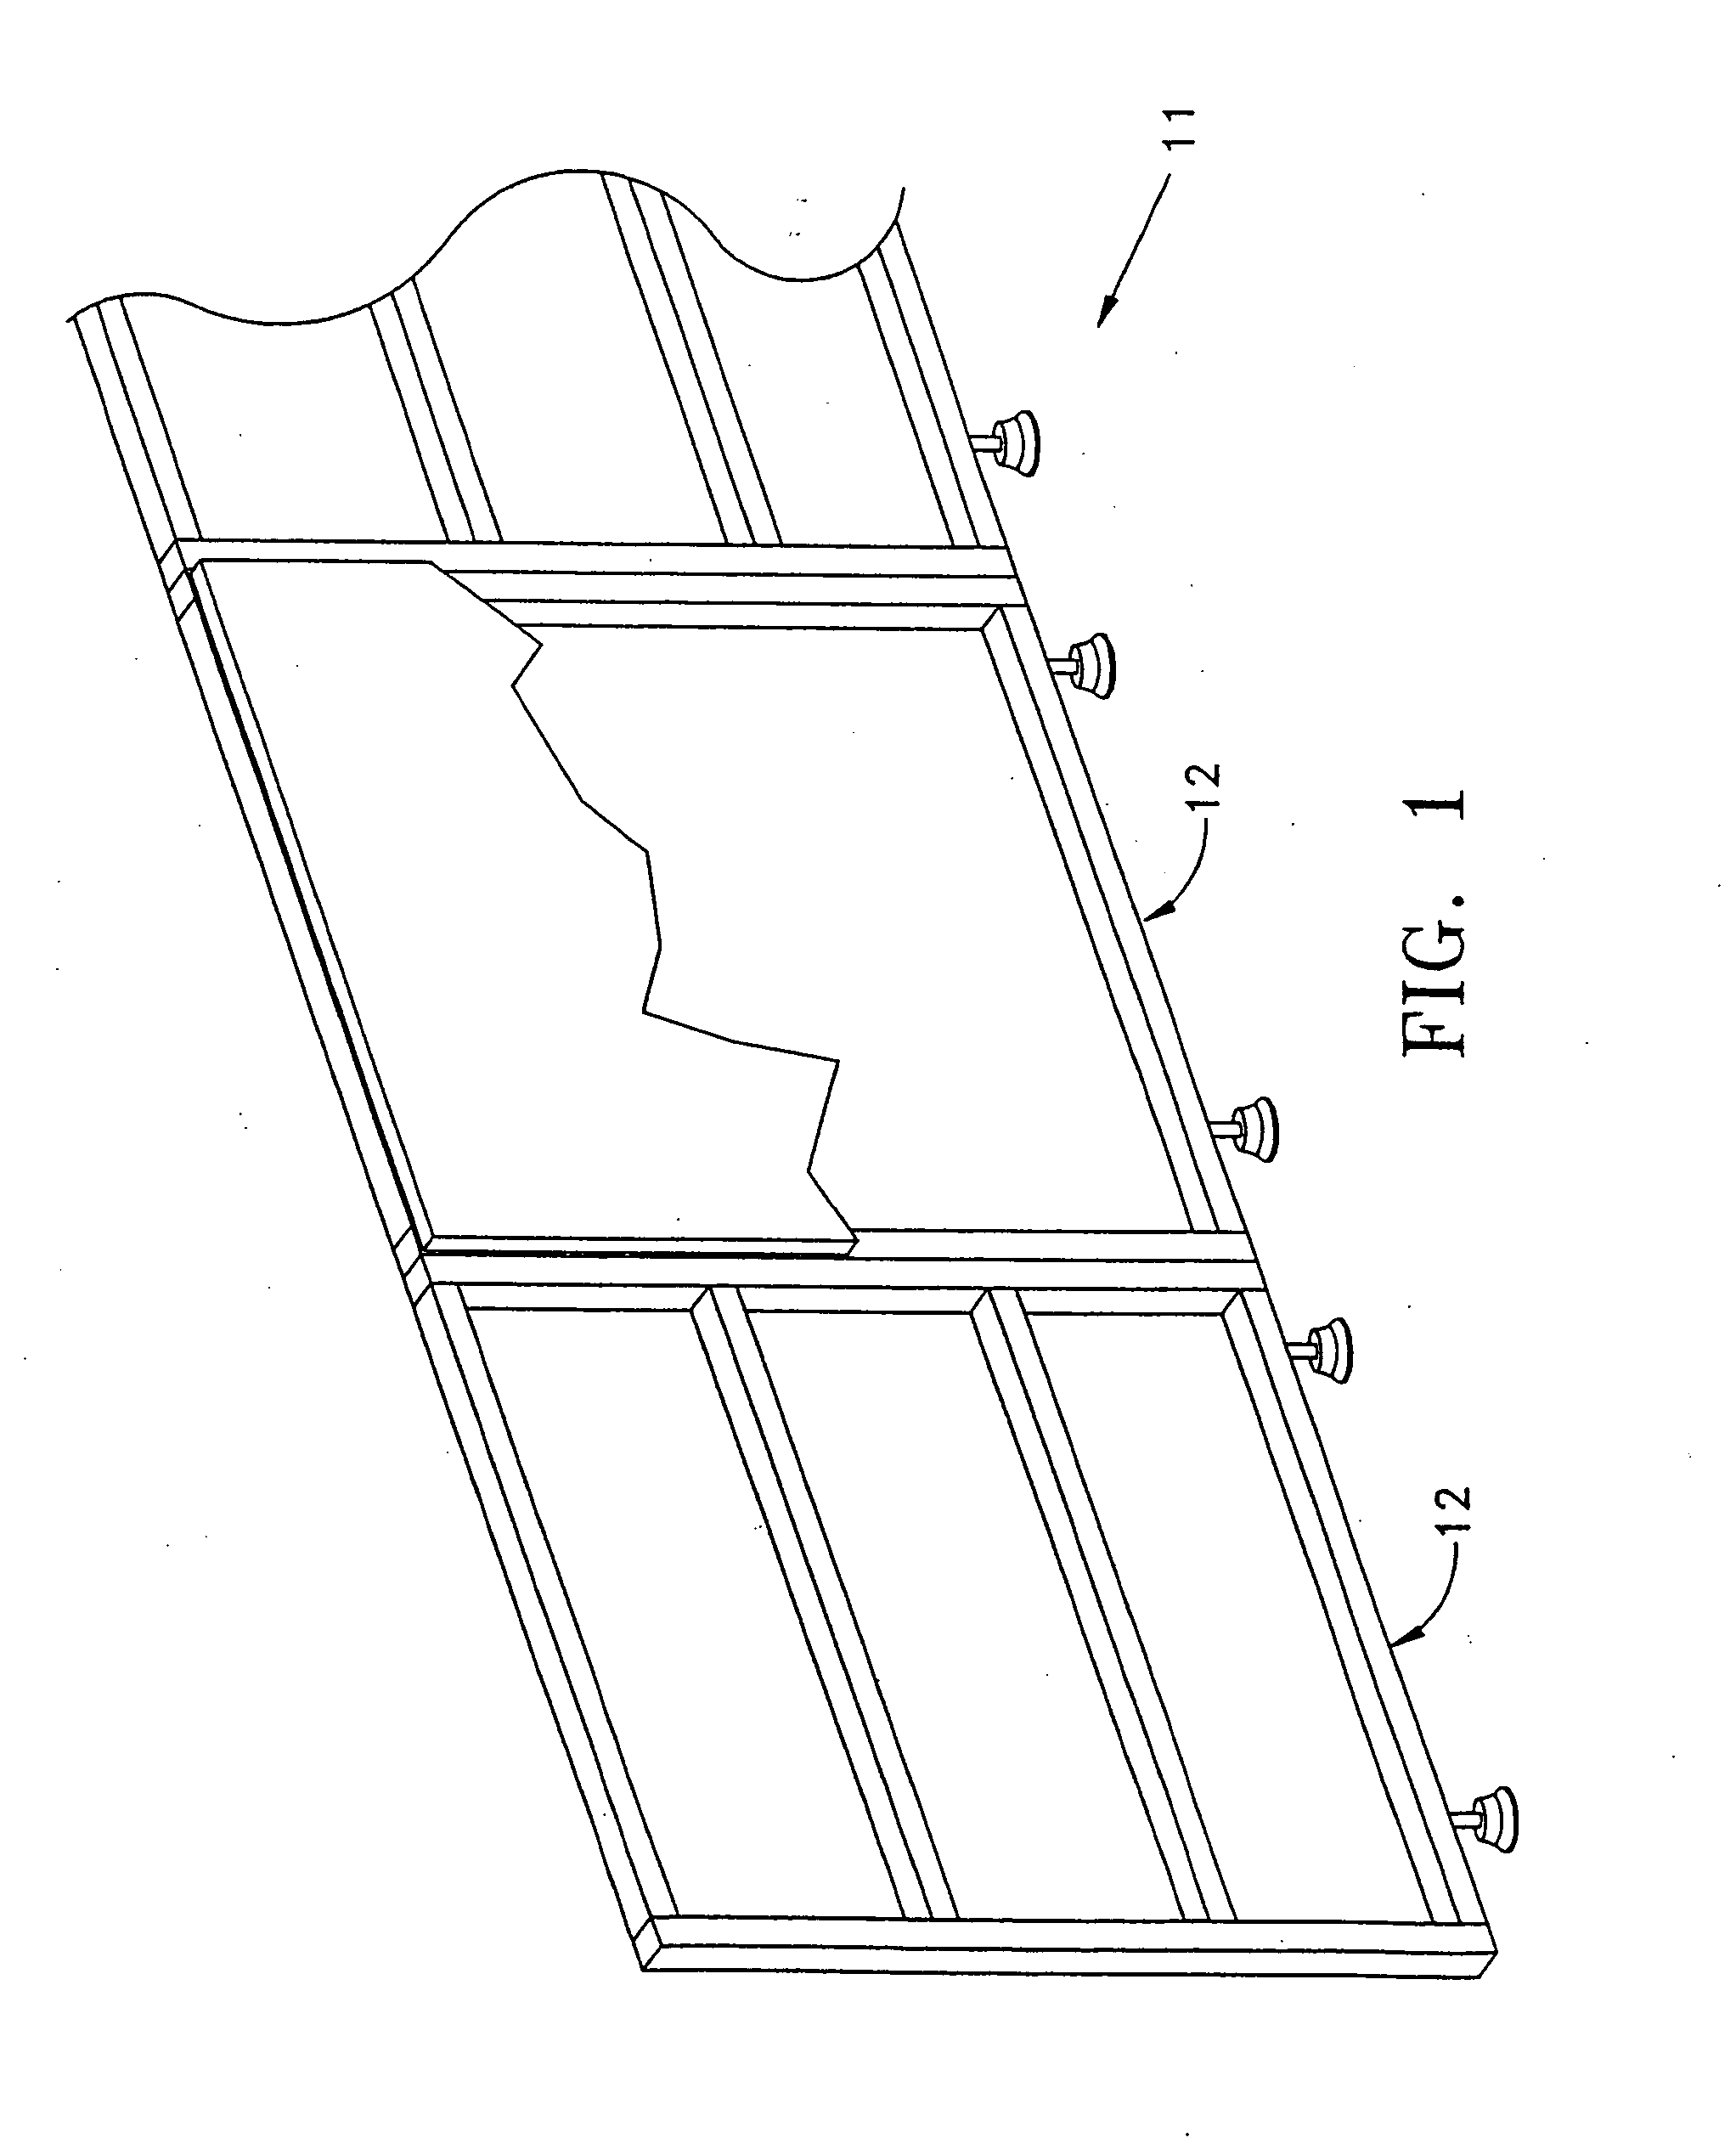 Pad for wall panel and forming process